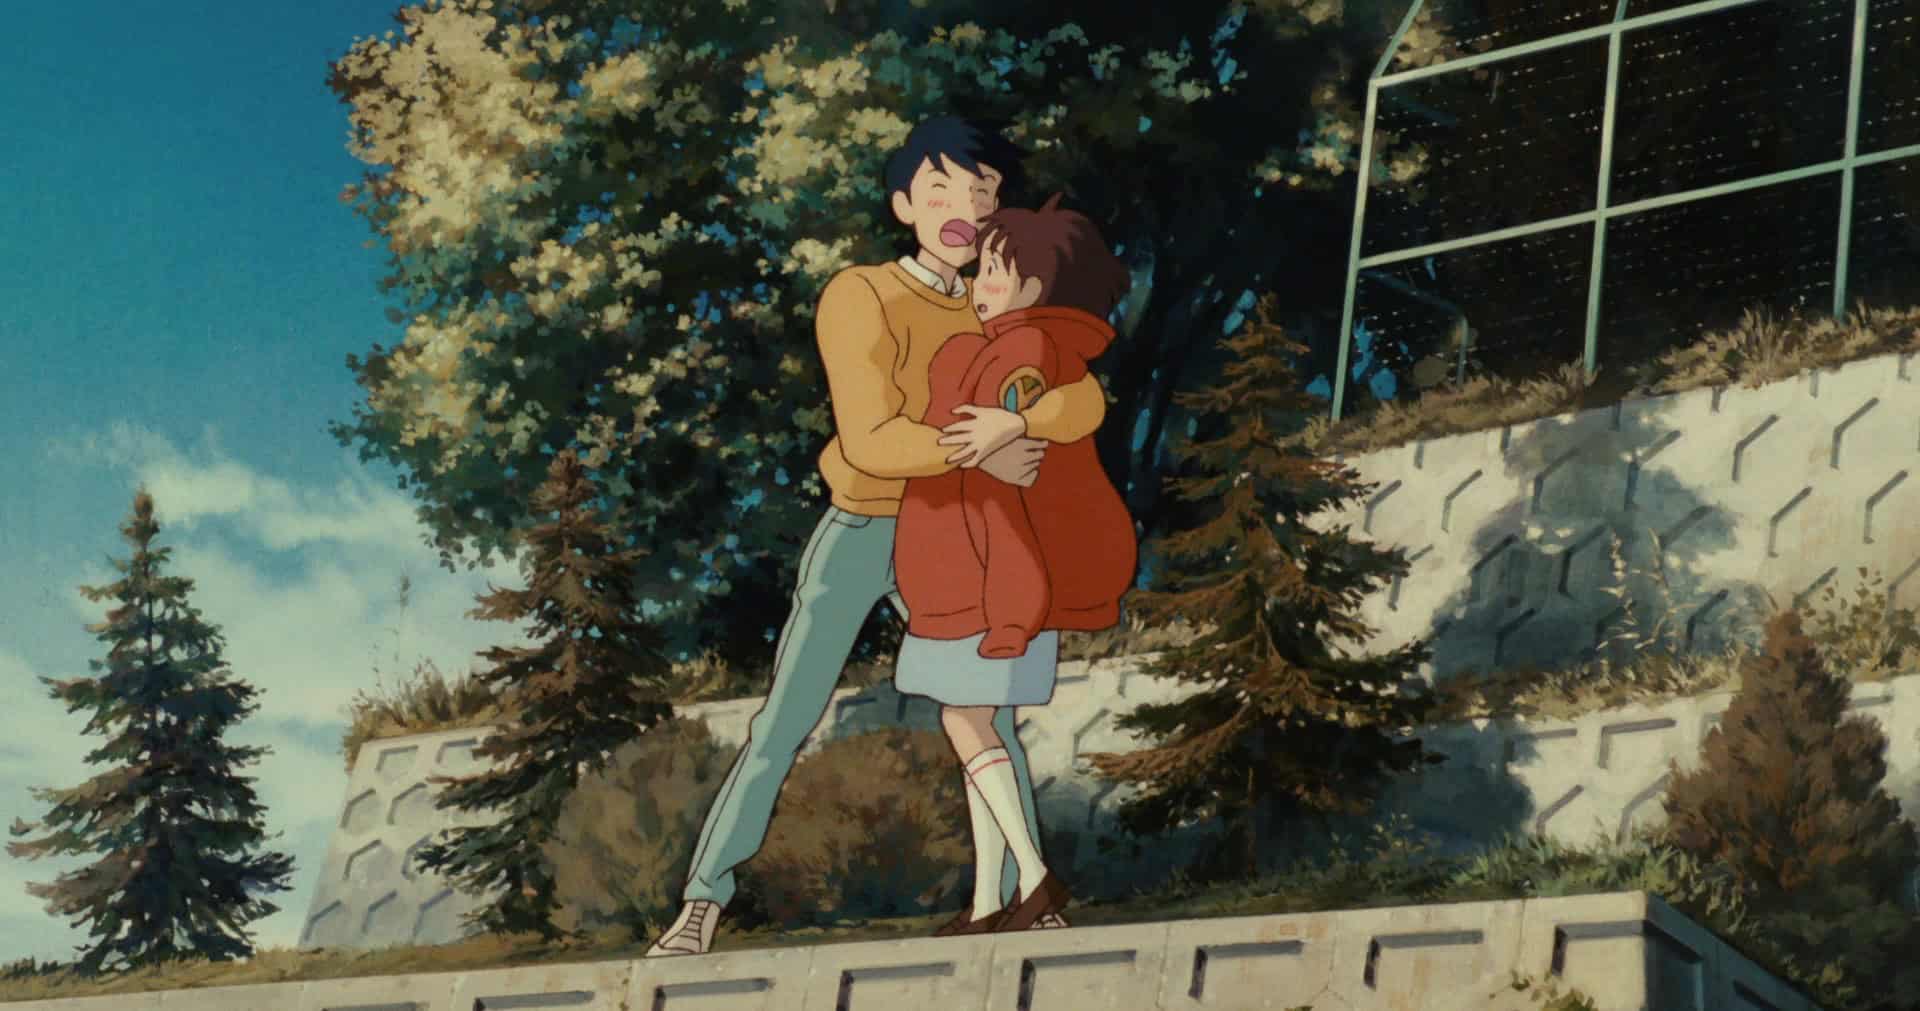 An animated boy yells into the wind while holding a girl in this image from Studio Ghibli.